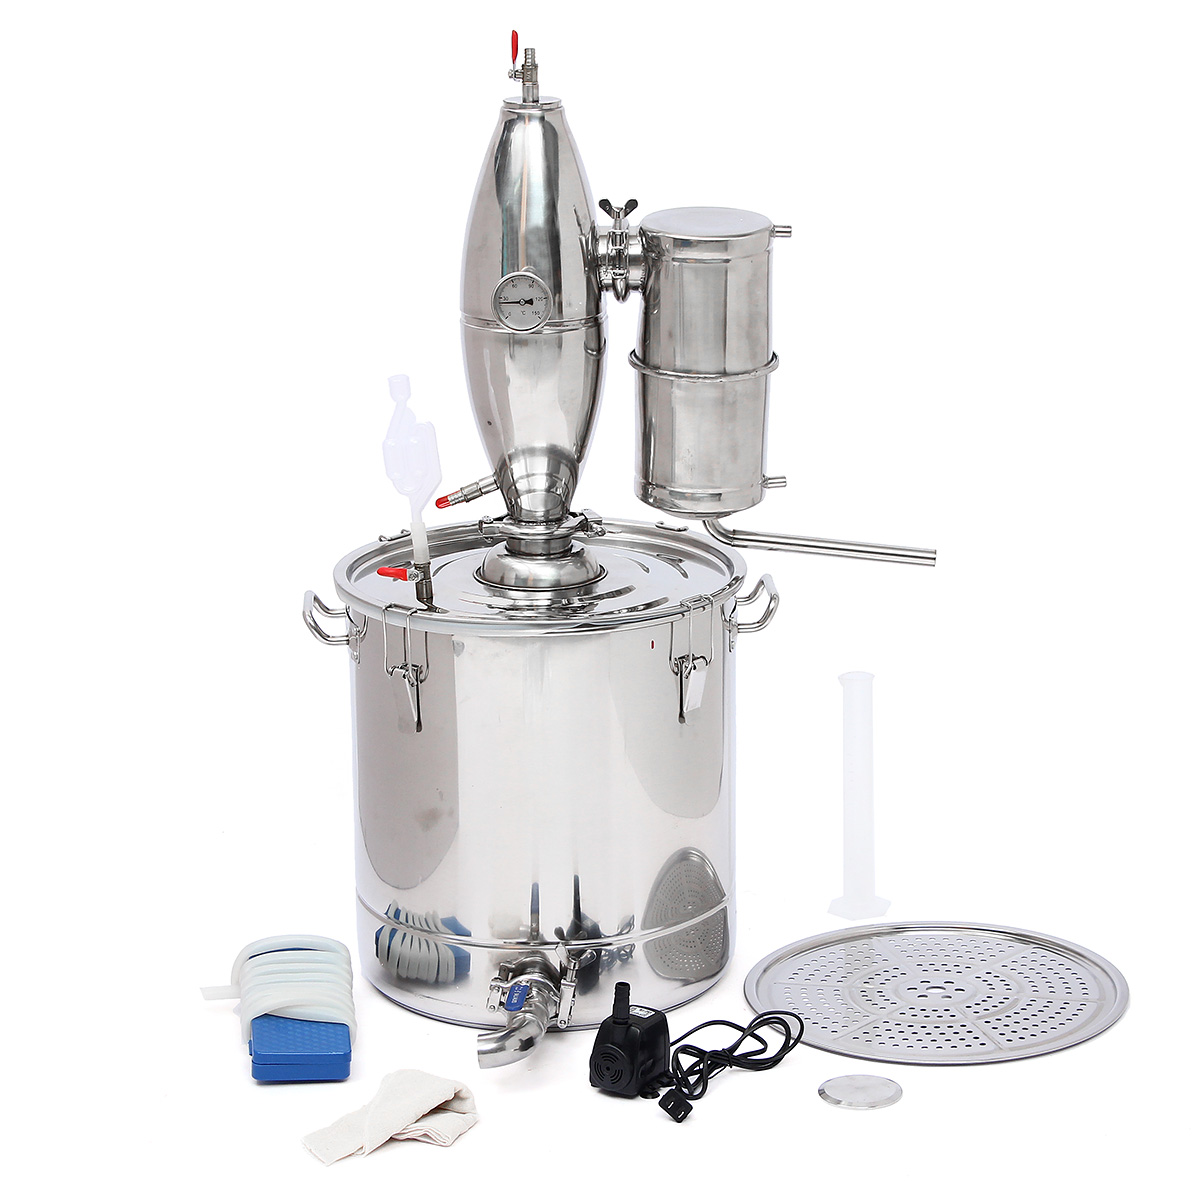 

Stainless Steel Alcohol Distiller Brew Kit Distillation Purifying Alcohol Brewing Making Alcohol Making Tools